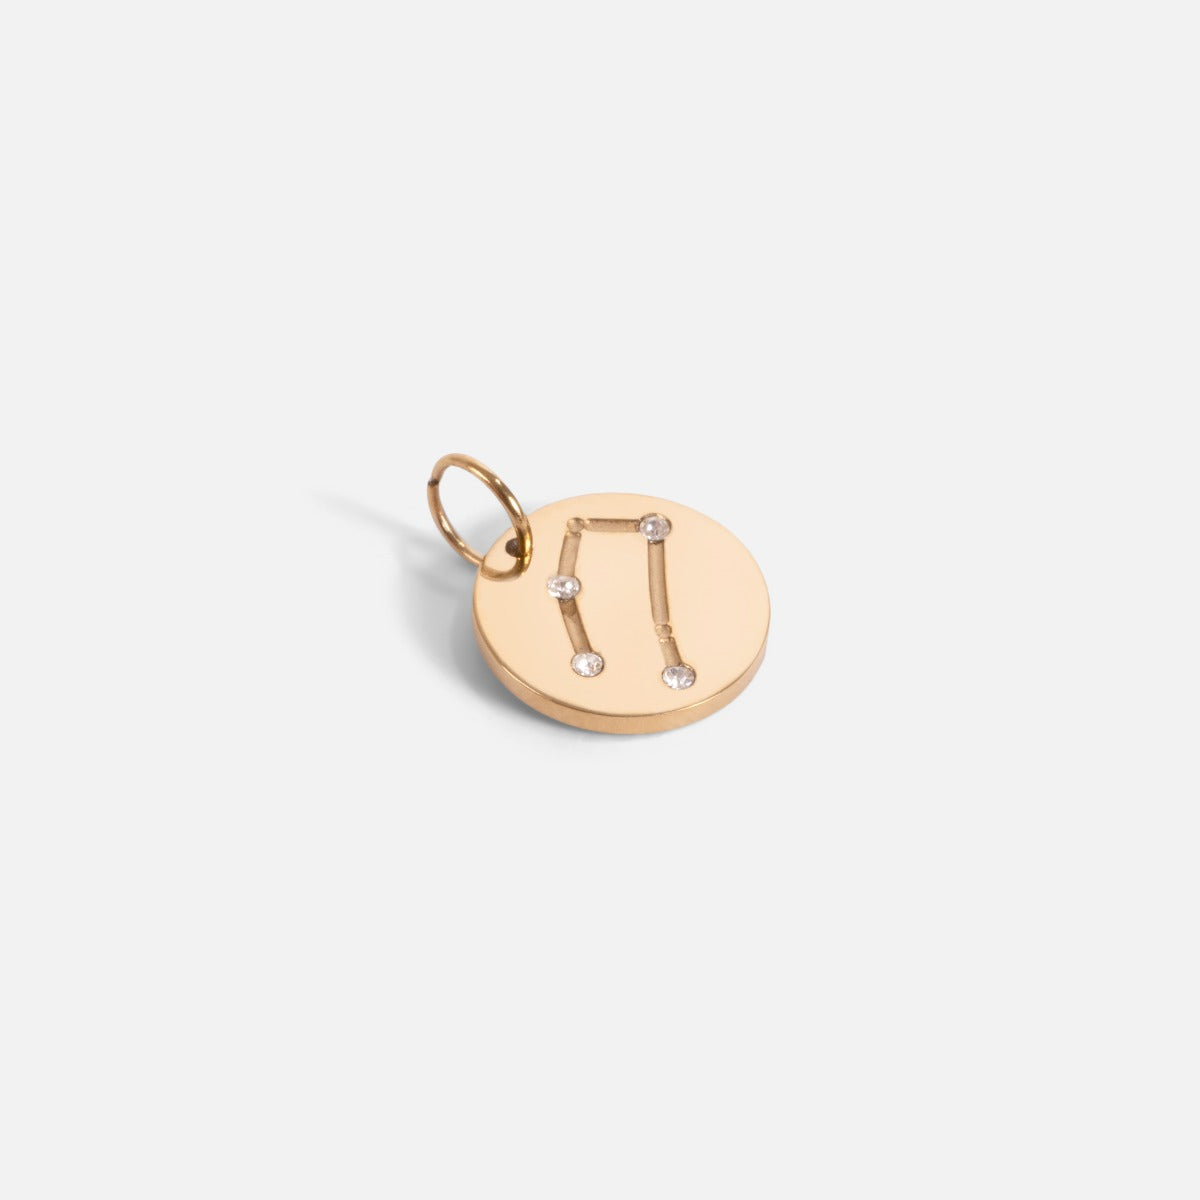 Small golden charm engraved with the zodiac constellation "gemini"